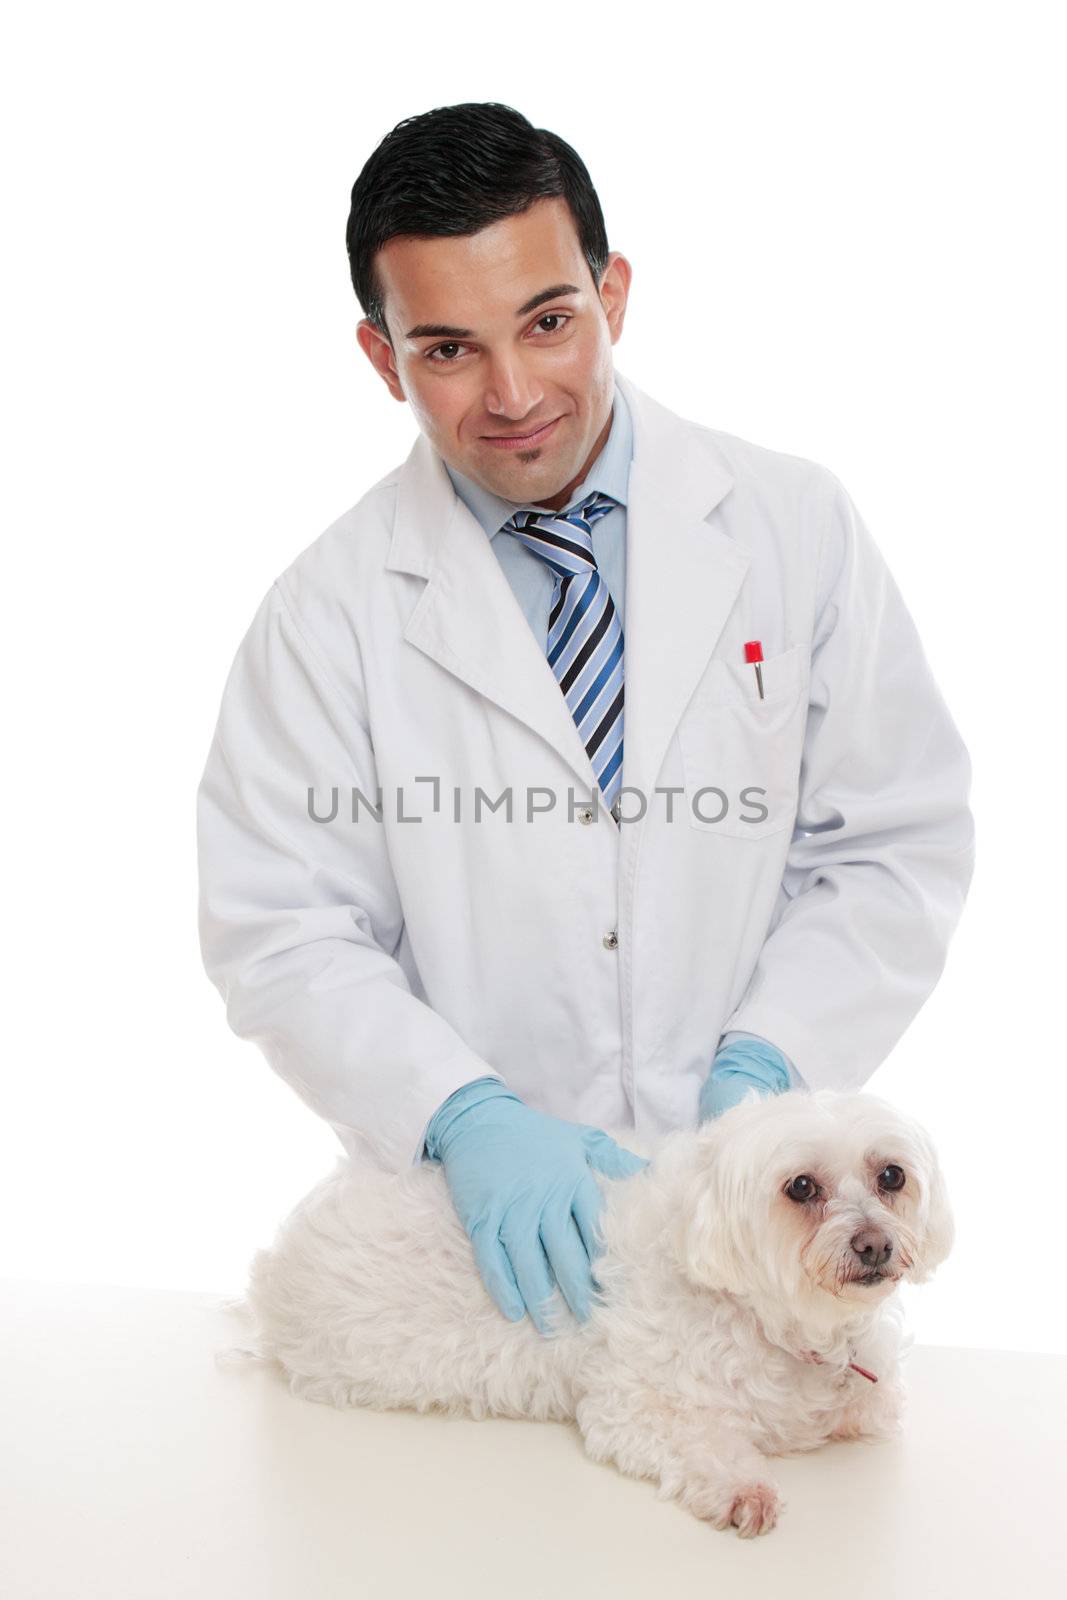 Friendly male veterinarian smiling and gently holding a pet animal on examination table.